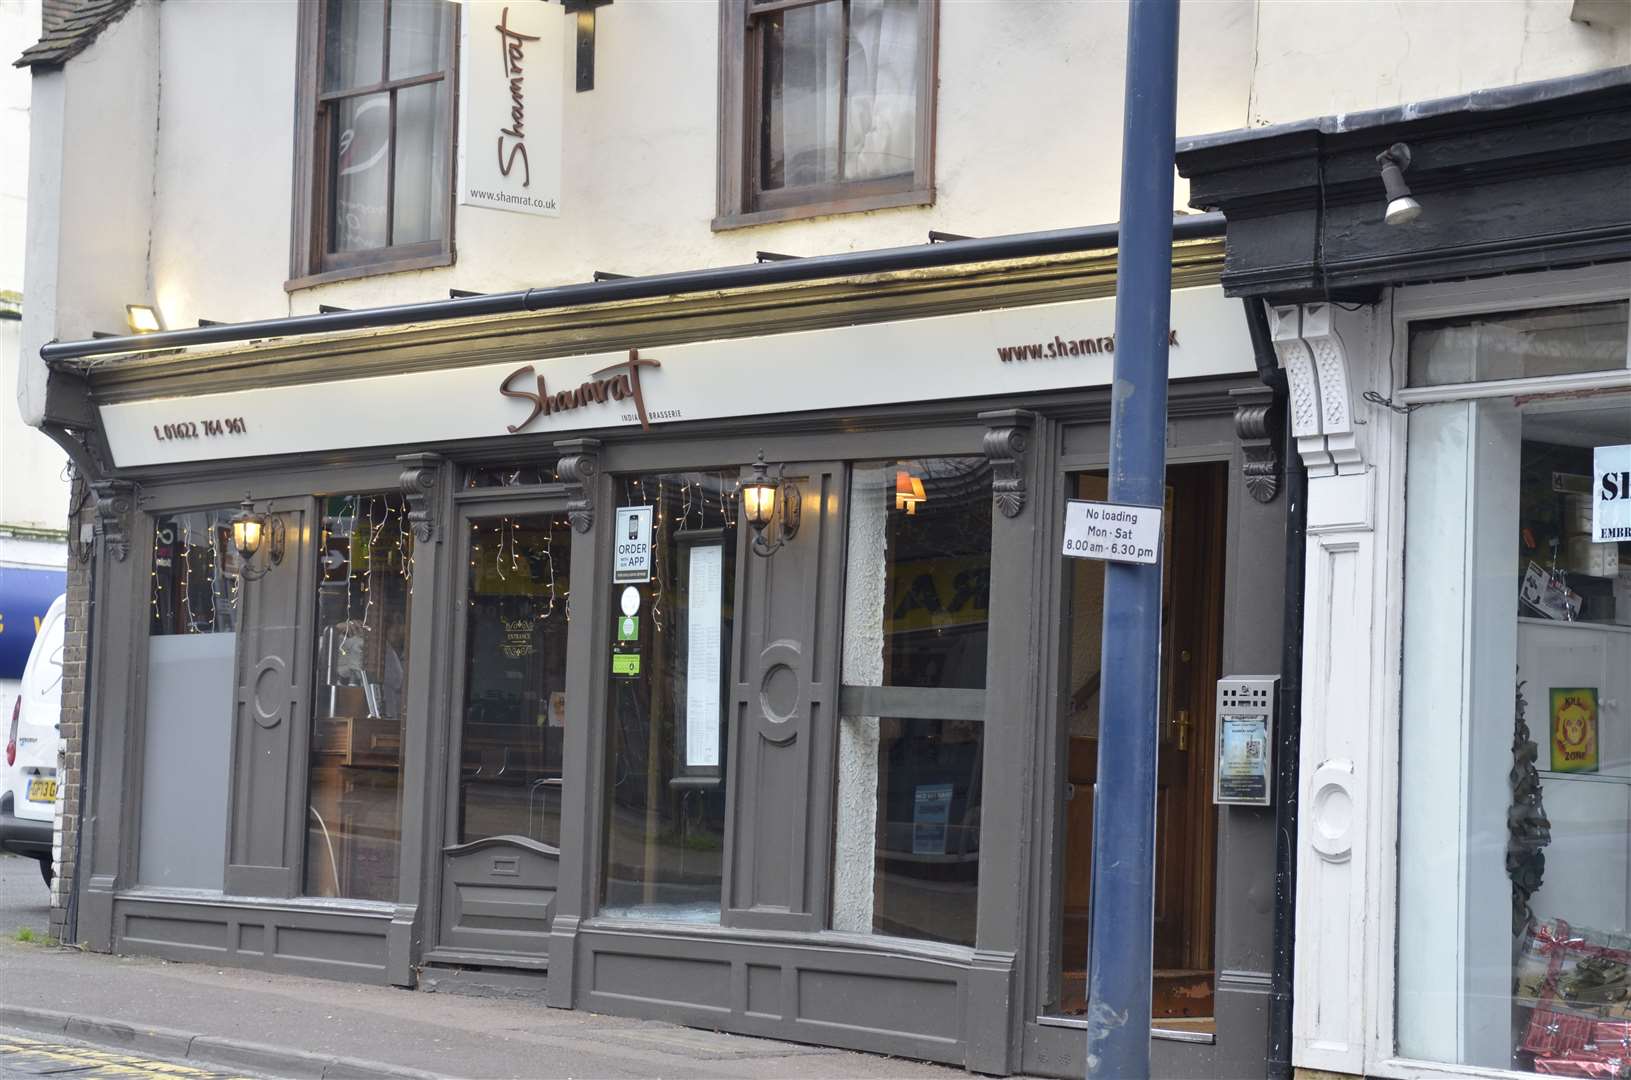 The assault took place in the Shamrat restaurant in Lower Stone Street, Maidstone. Picture: Bob Kitchin